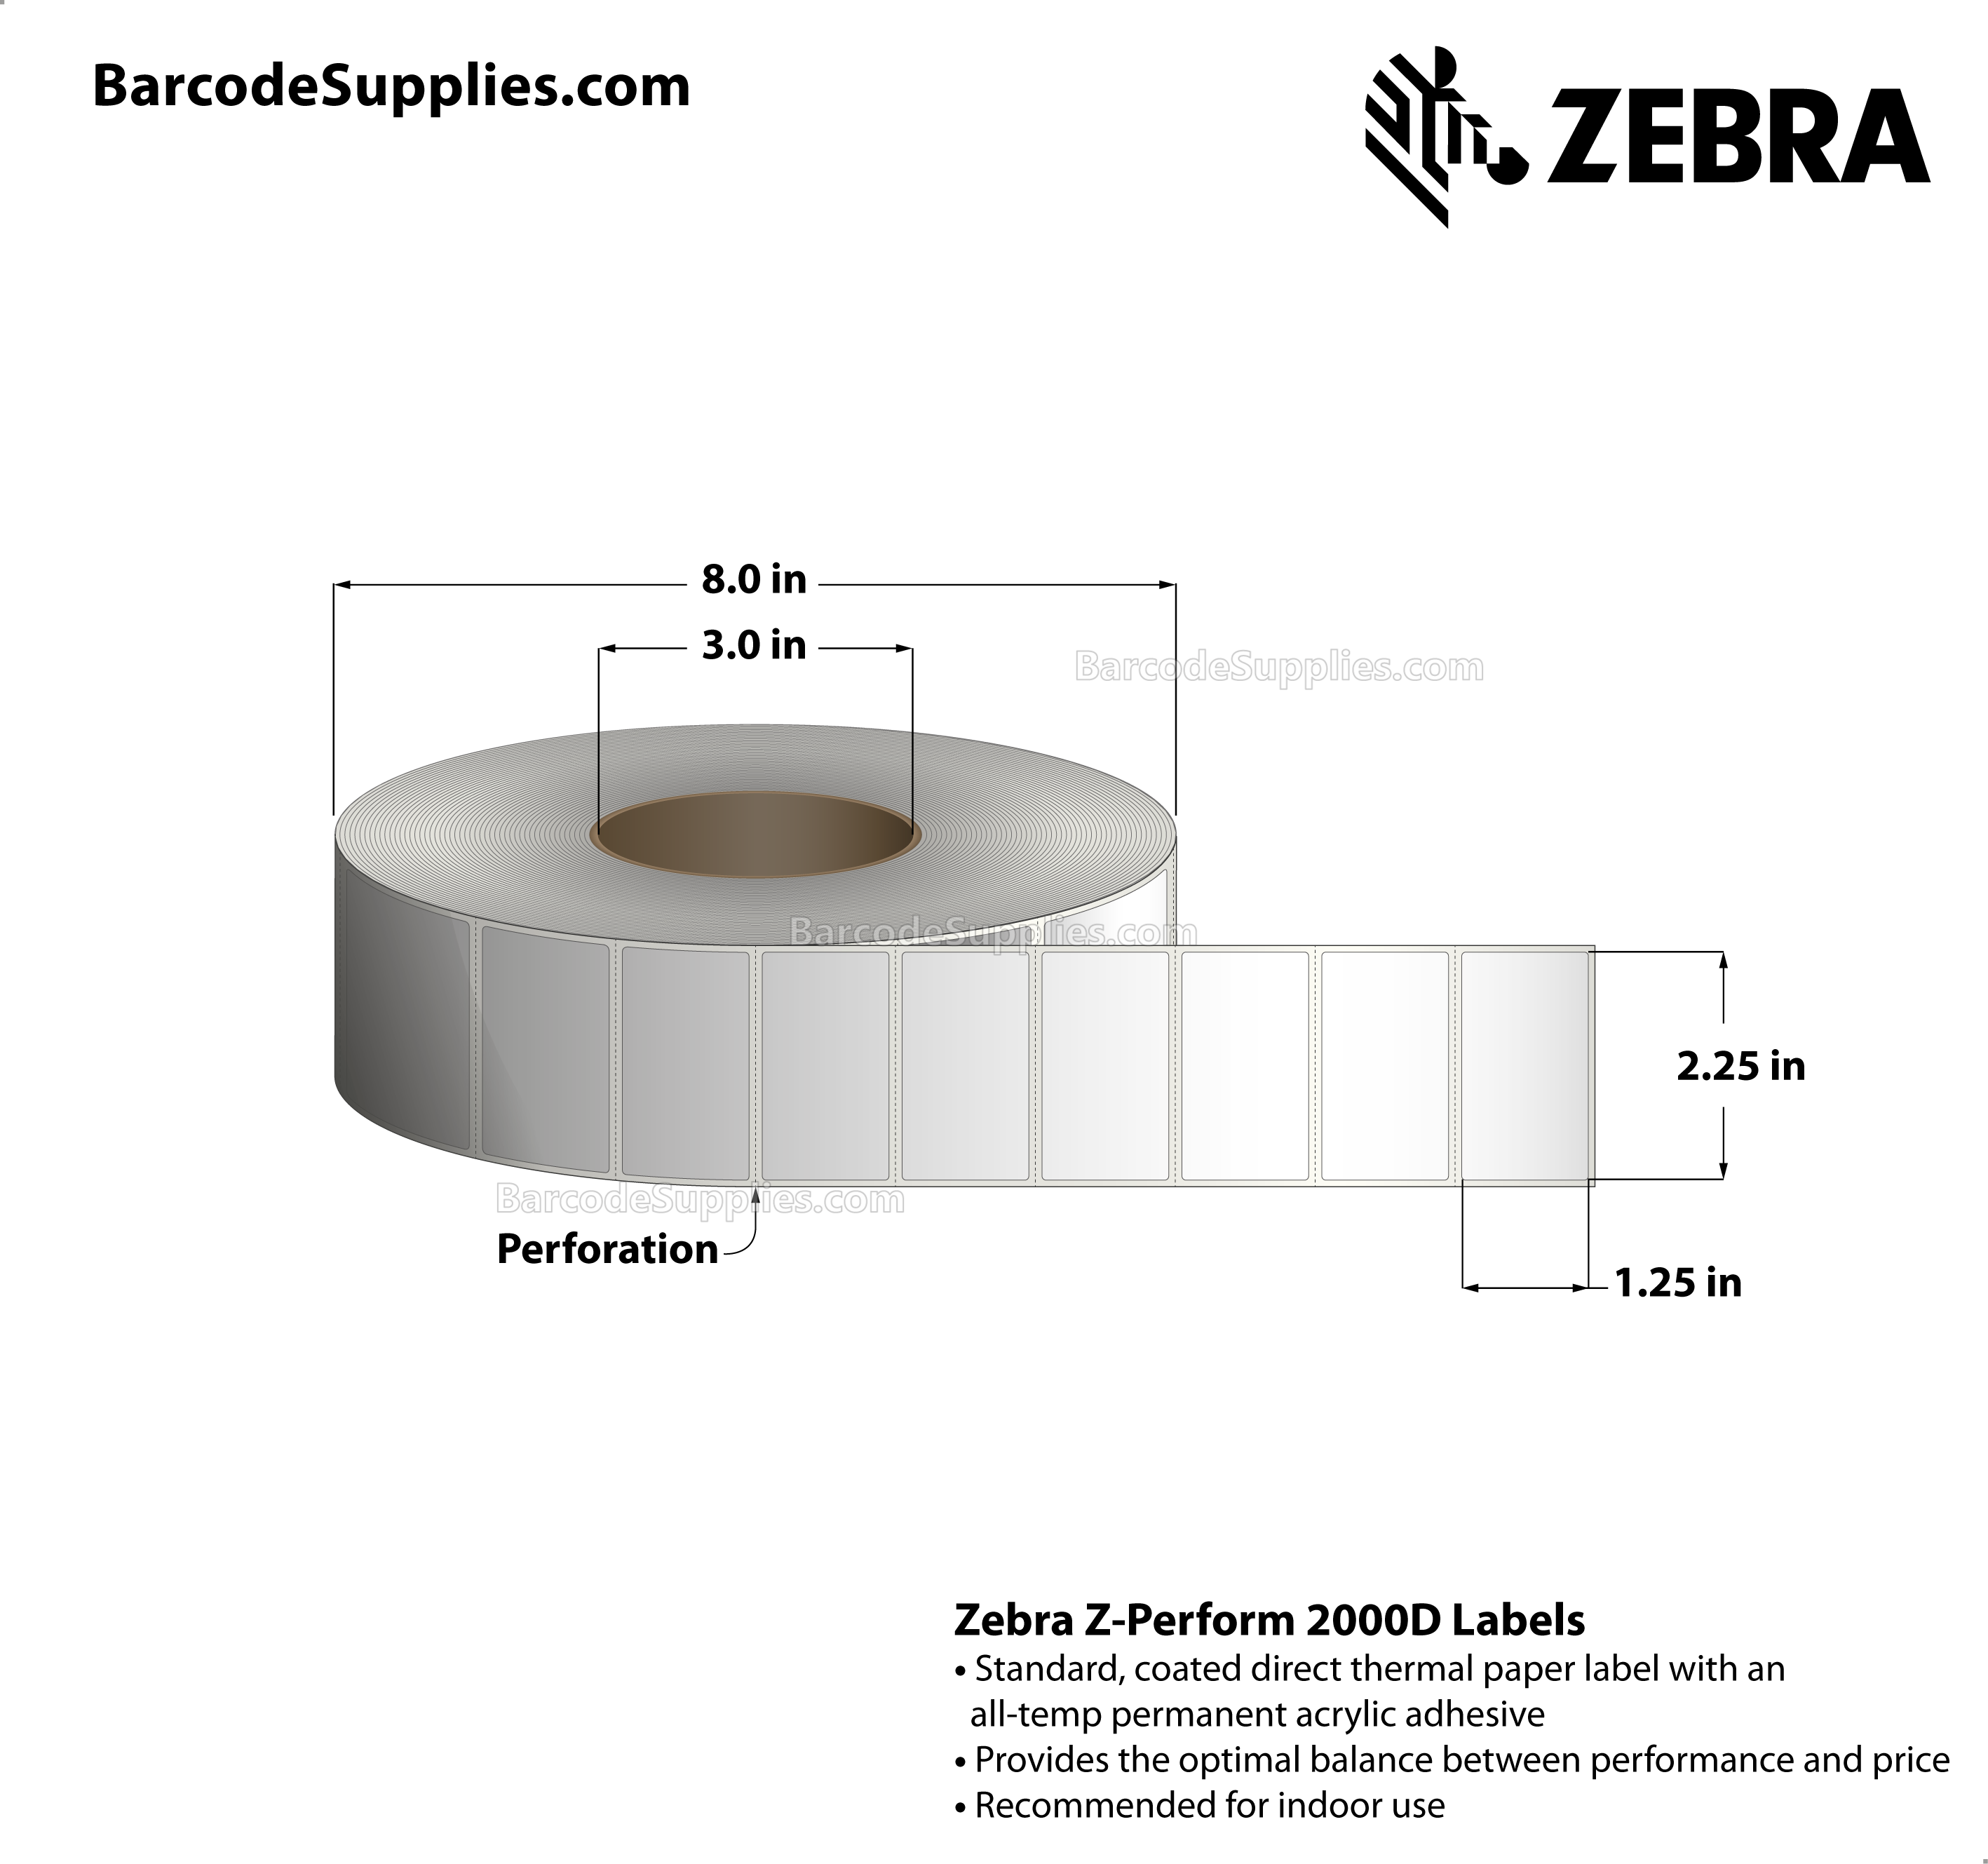 2.25 x 1.25 Direct Thermal White Z-Perform 2000D Labels With All-Temp Adhesive - Perforated - 4350 Labels Per Roll - Carton Of 8 Rolls - 34800 Labels Total - MPN: 10000297